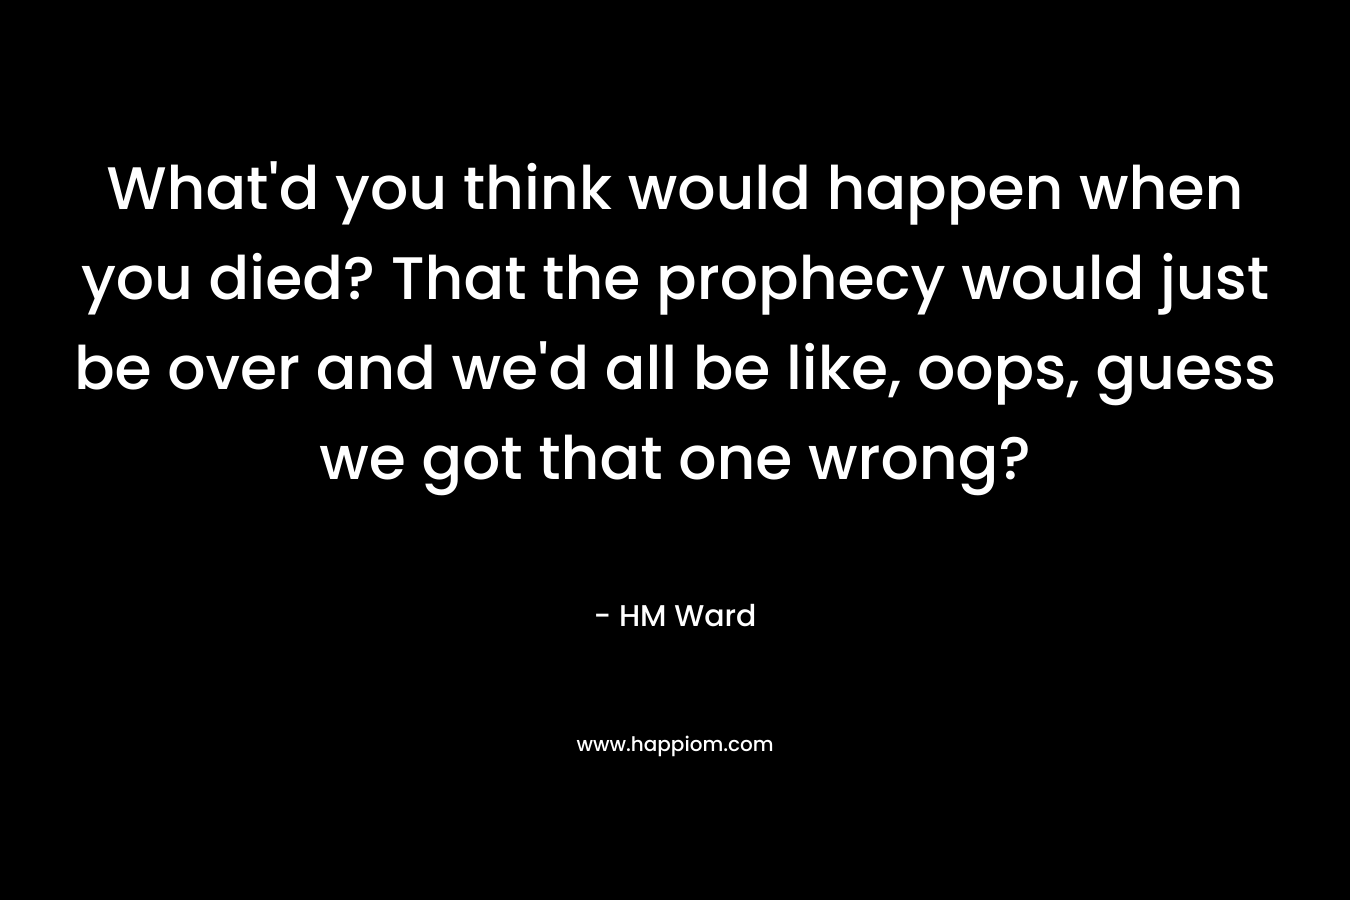 What’d you think would happen when you died? That the prophecy would just be over and we’d all be like, oops, guess we got that one wrong? – HM Ward